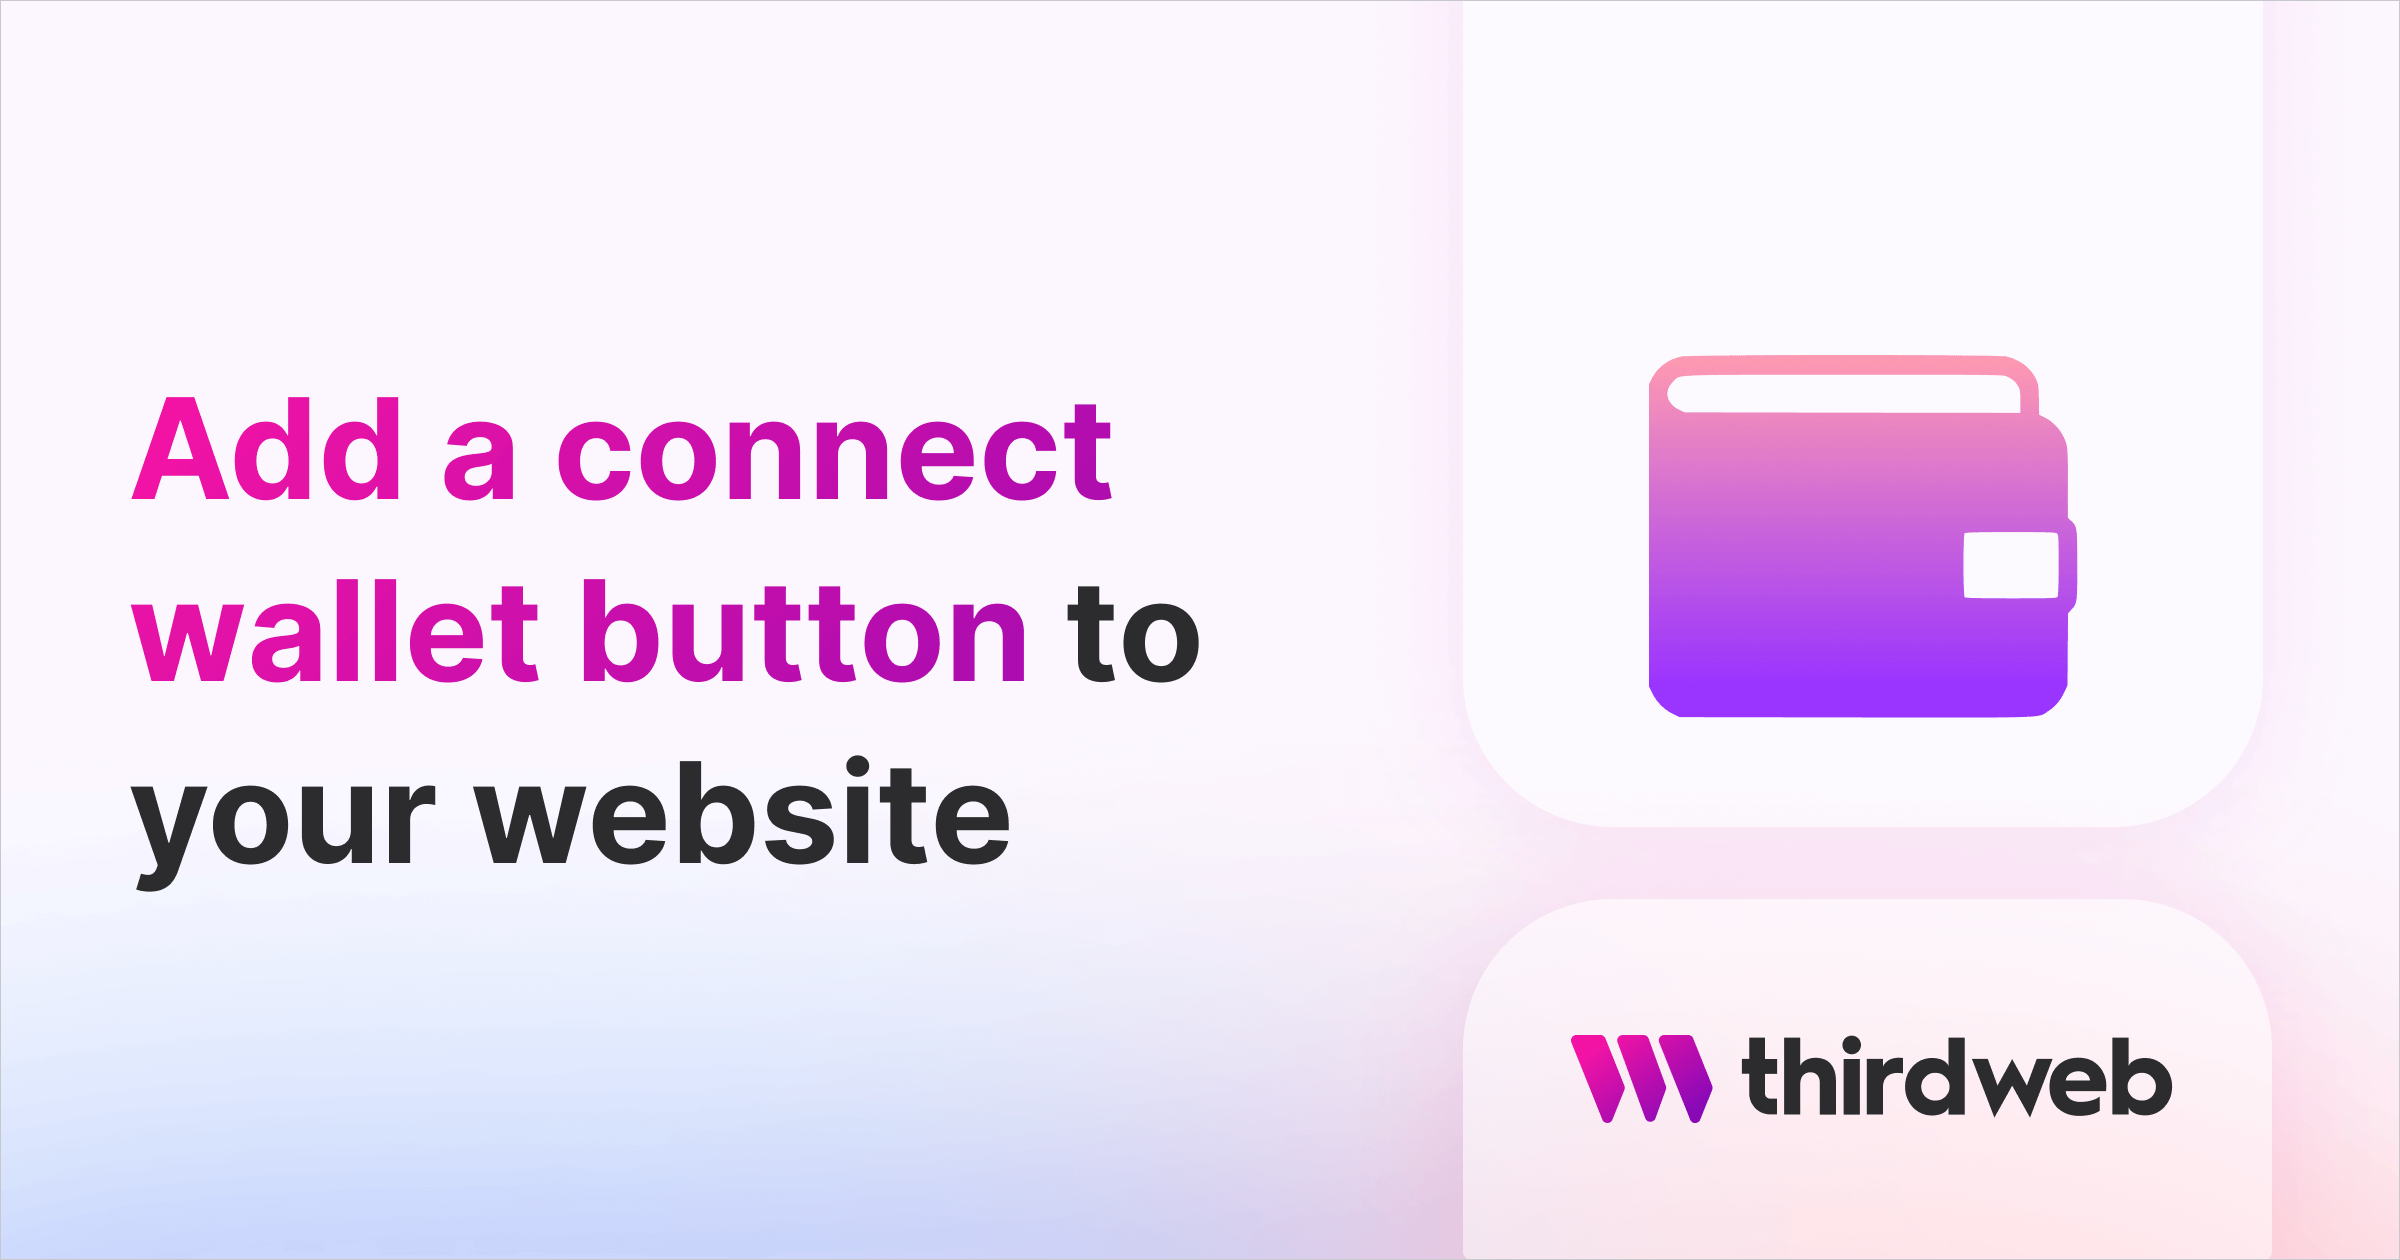 How to Add a Connect Wallet Button to Your Website